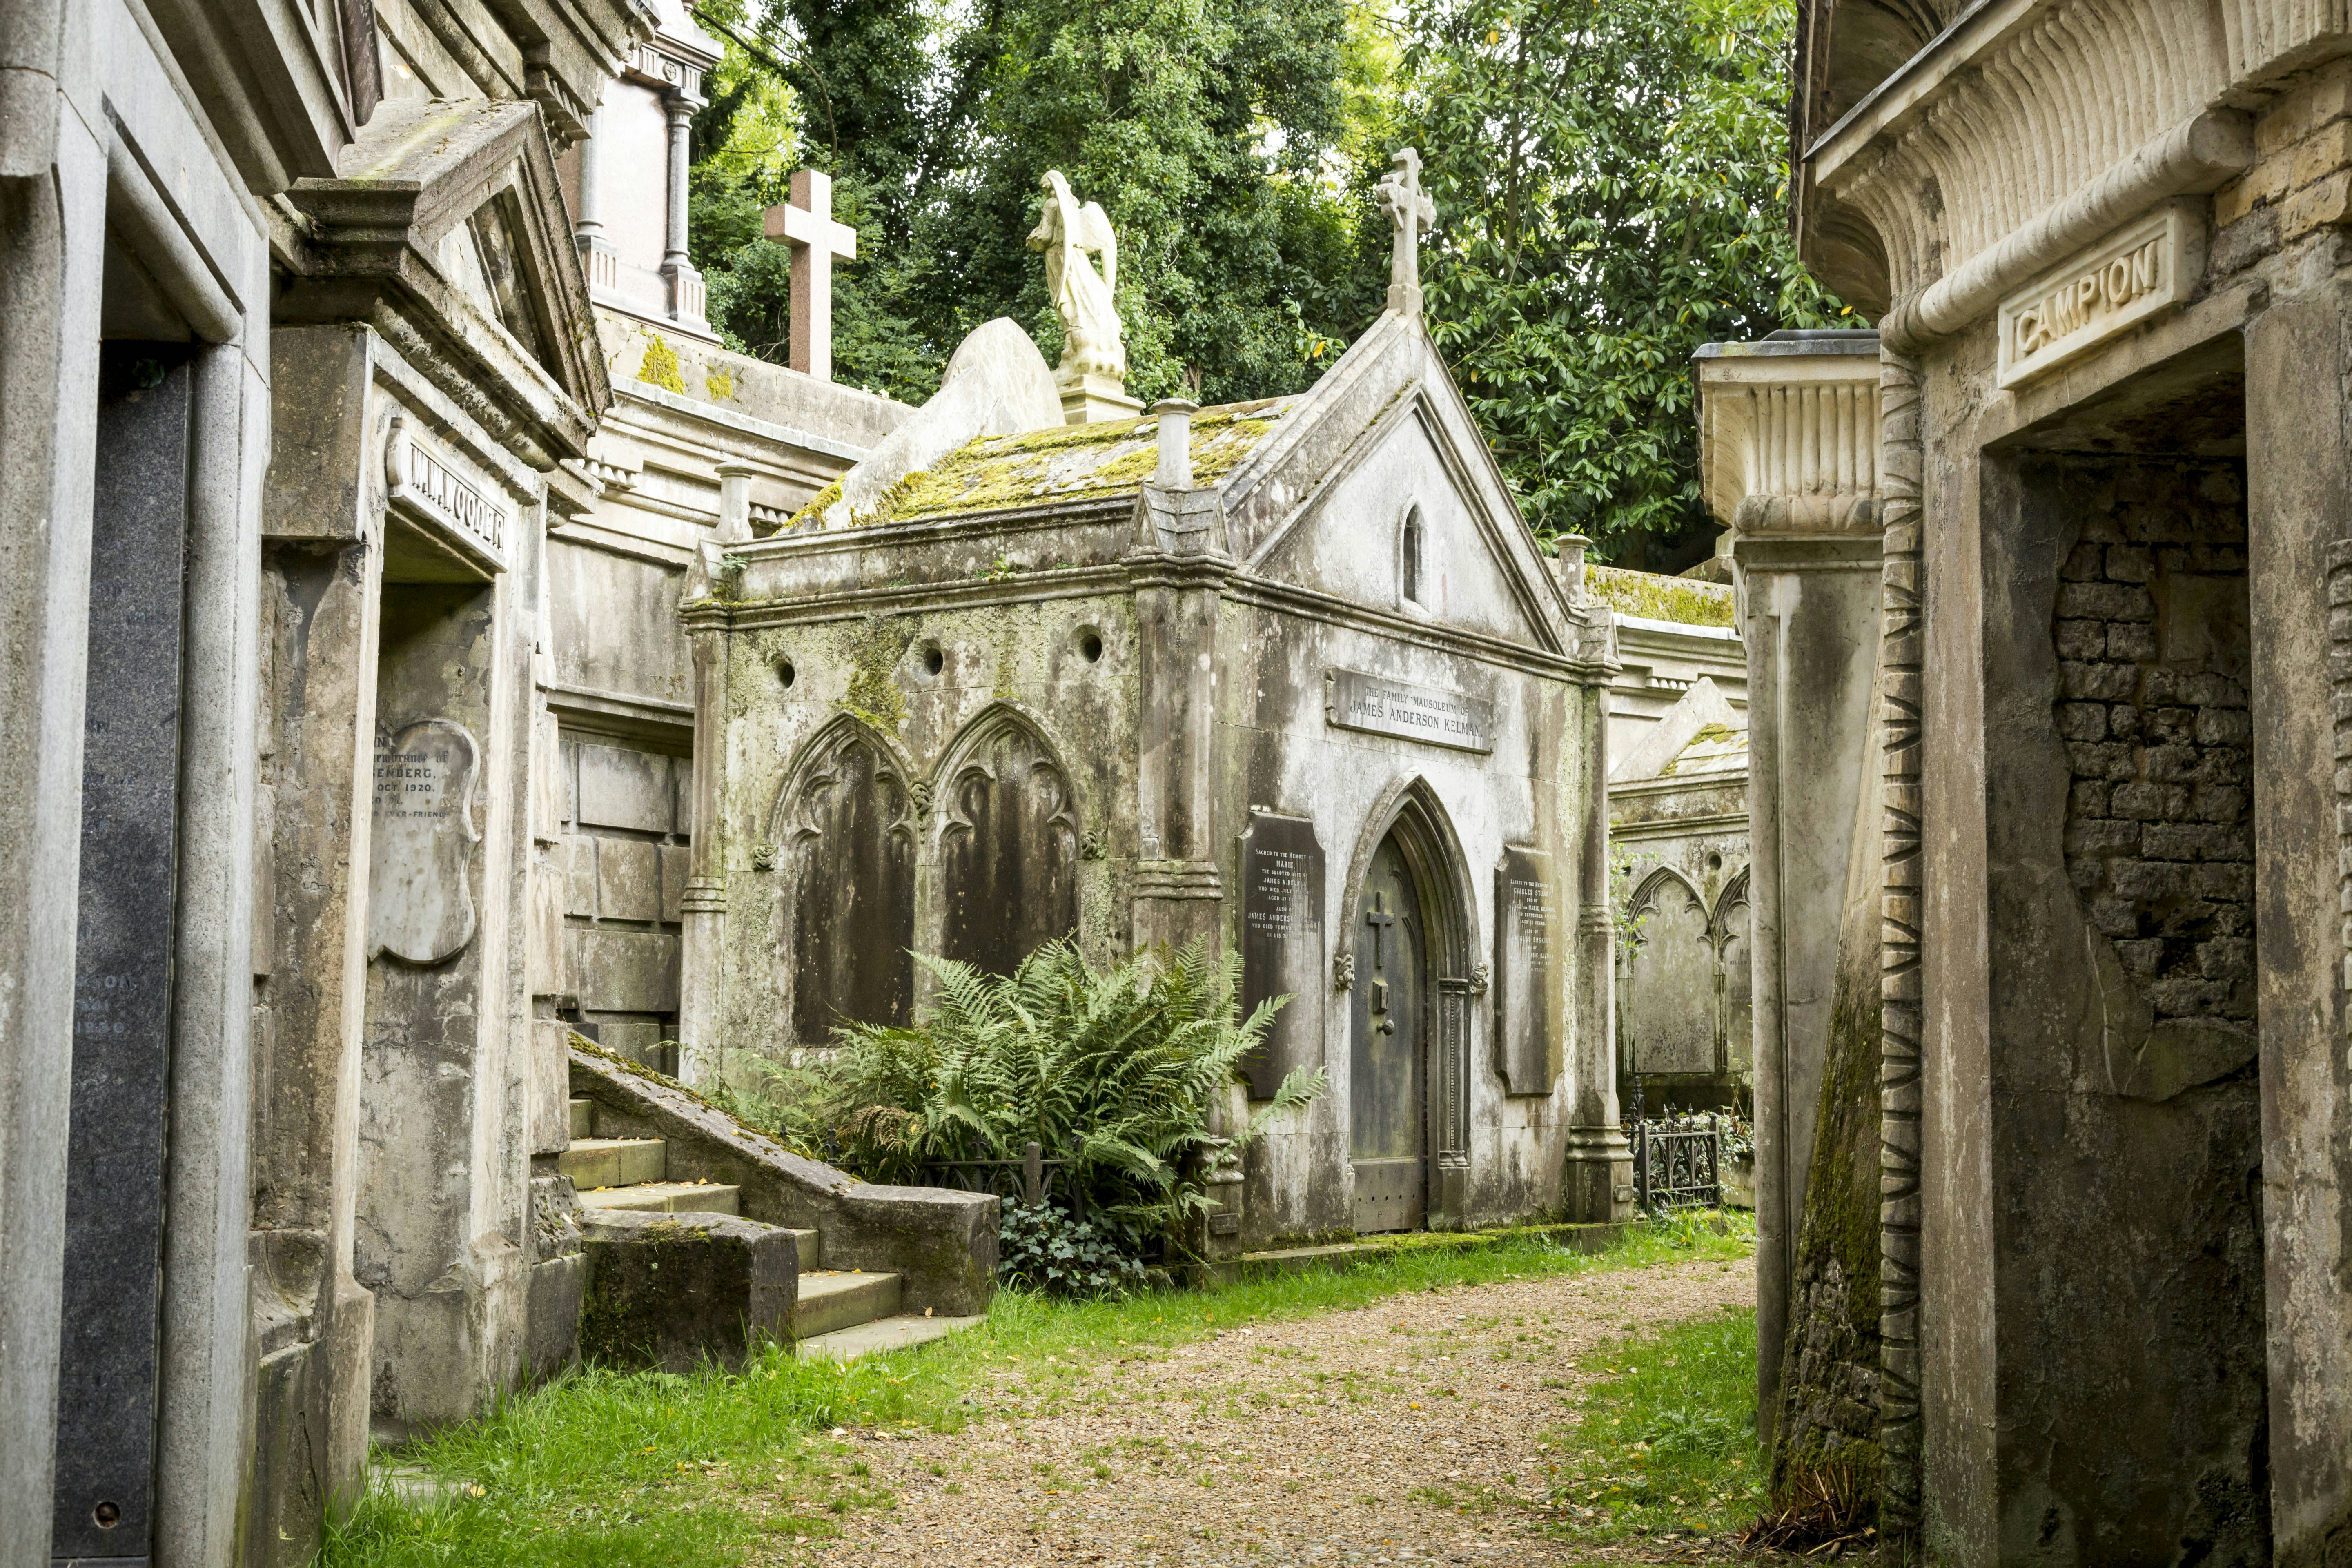 A path leading through Highgate Cemetery in London. There are large tombs running alongside the path.